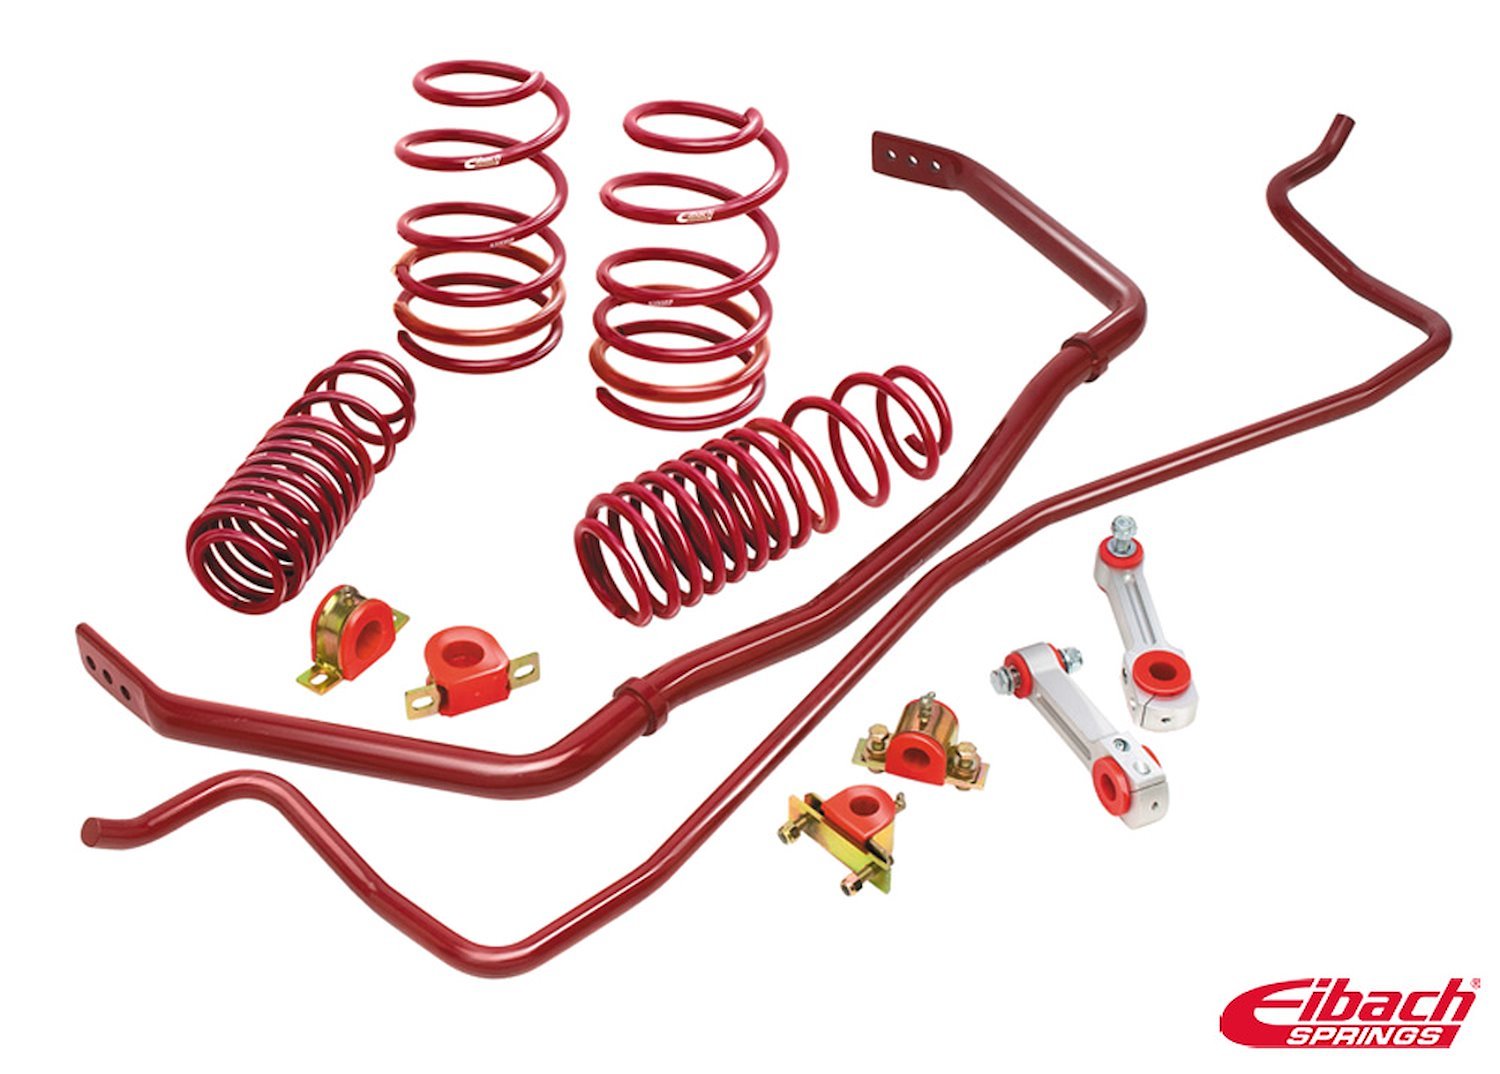 4.14535.880 Pro-System-Plus Suspension Kit 2015-2016 Ford Mustang GT - 1.500 in. Front/1.300 in. Rear Drop